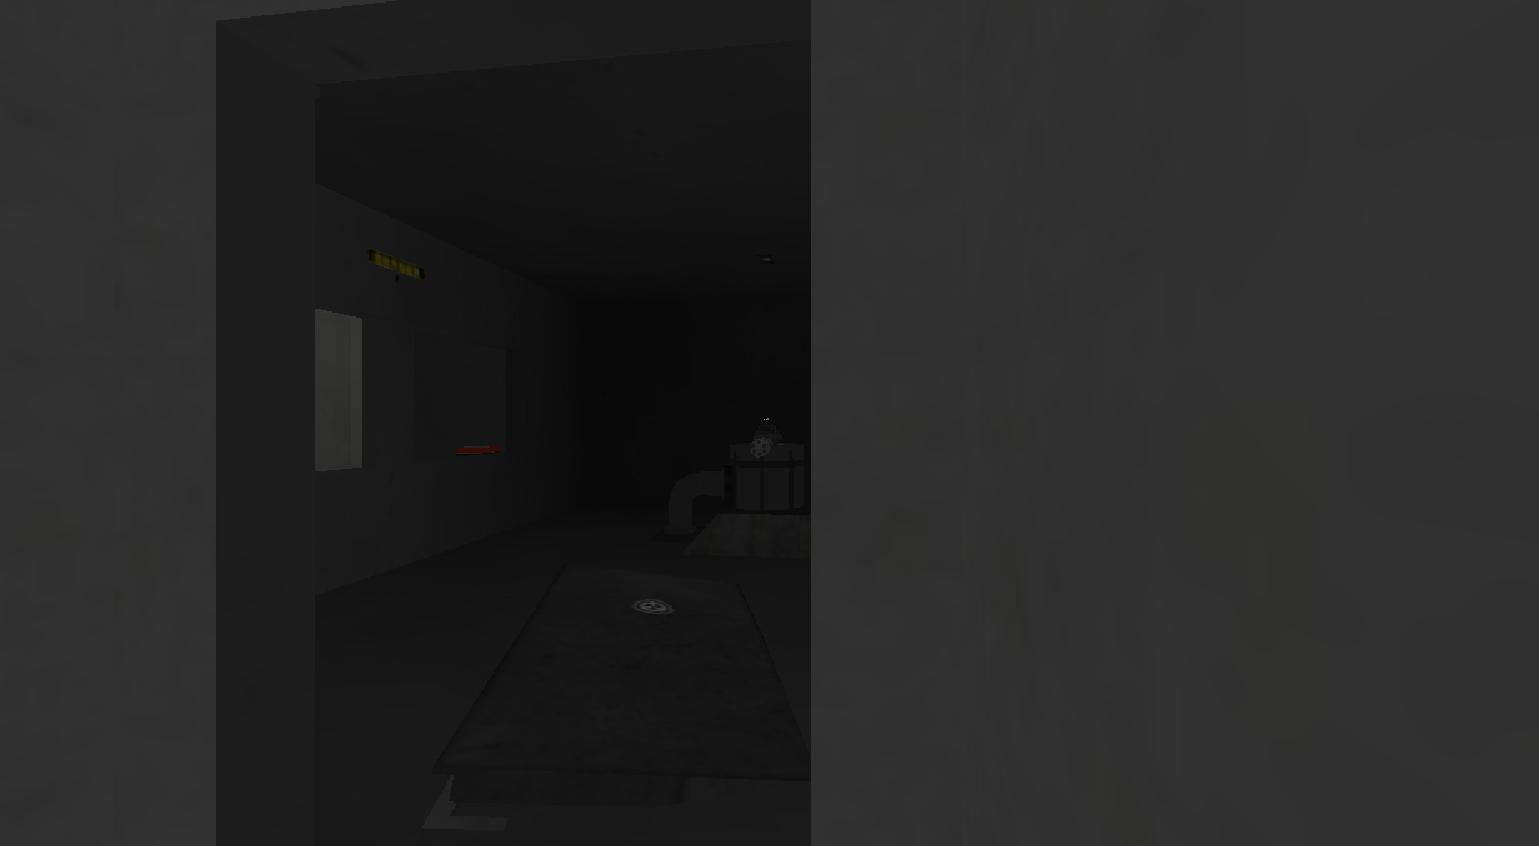 Scp Chamberz For Android Apk Download - scp 789 j roblox